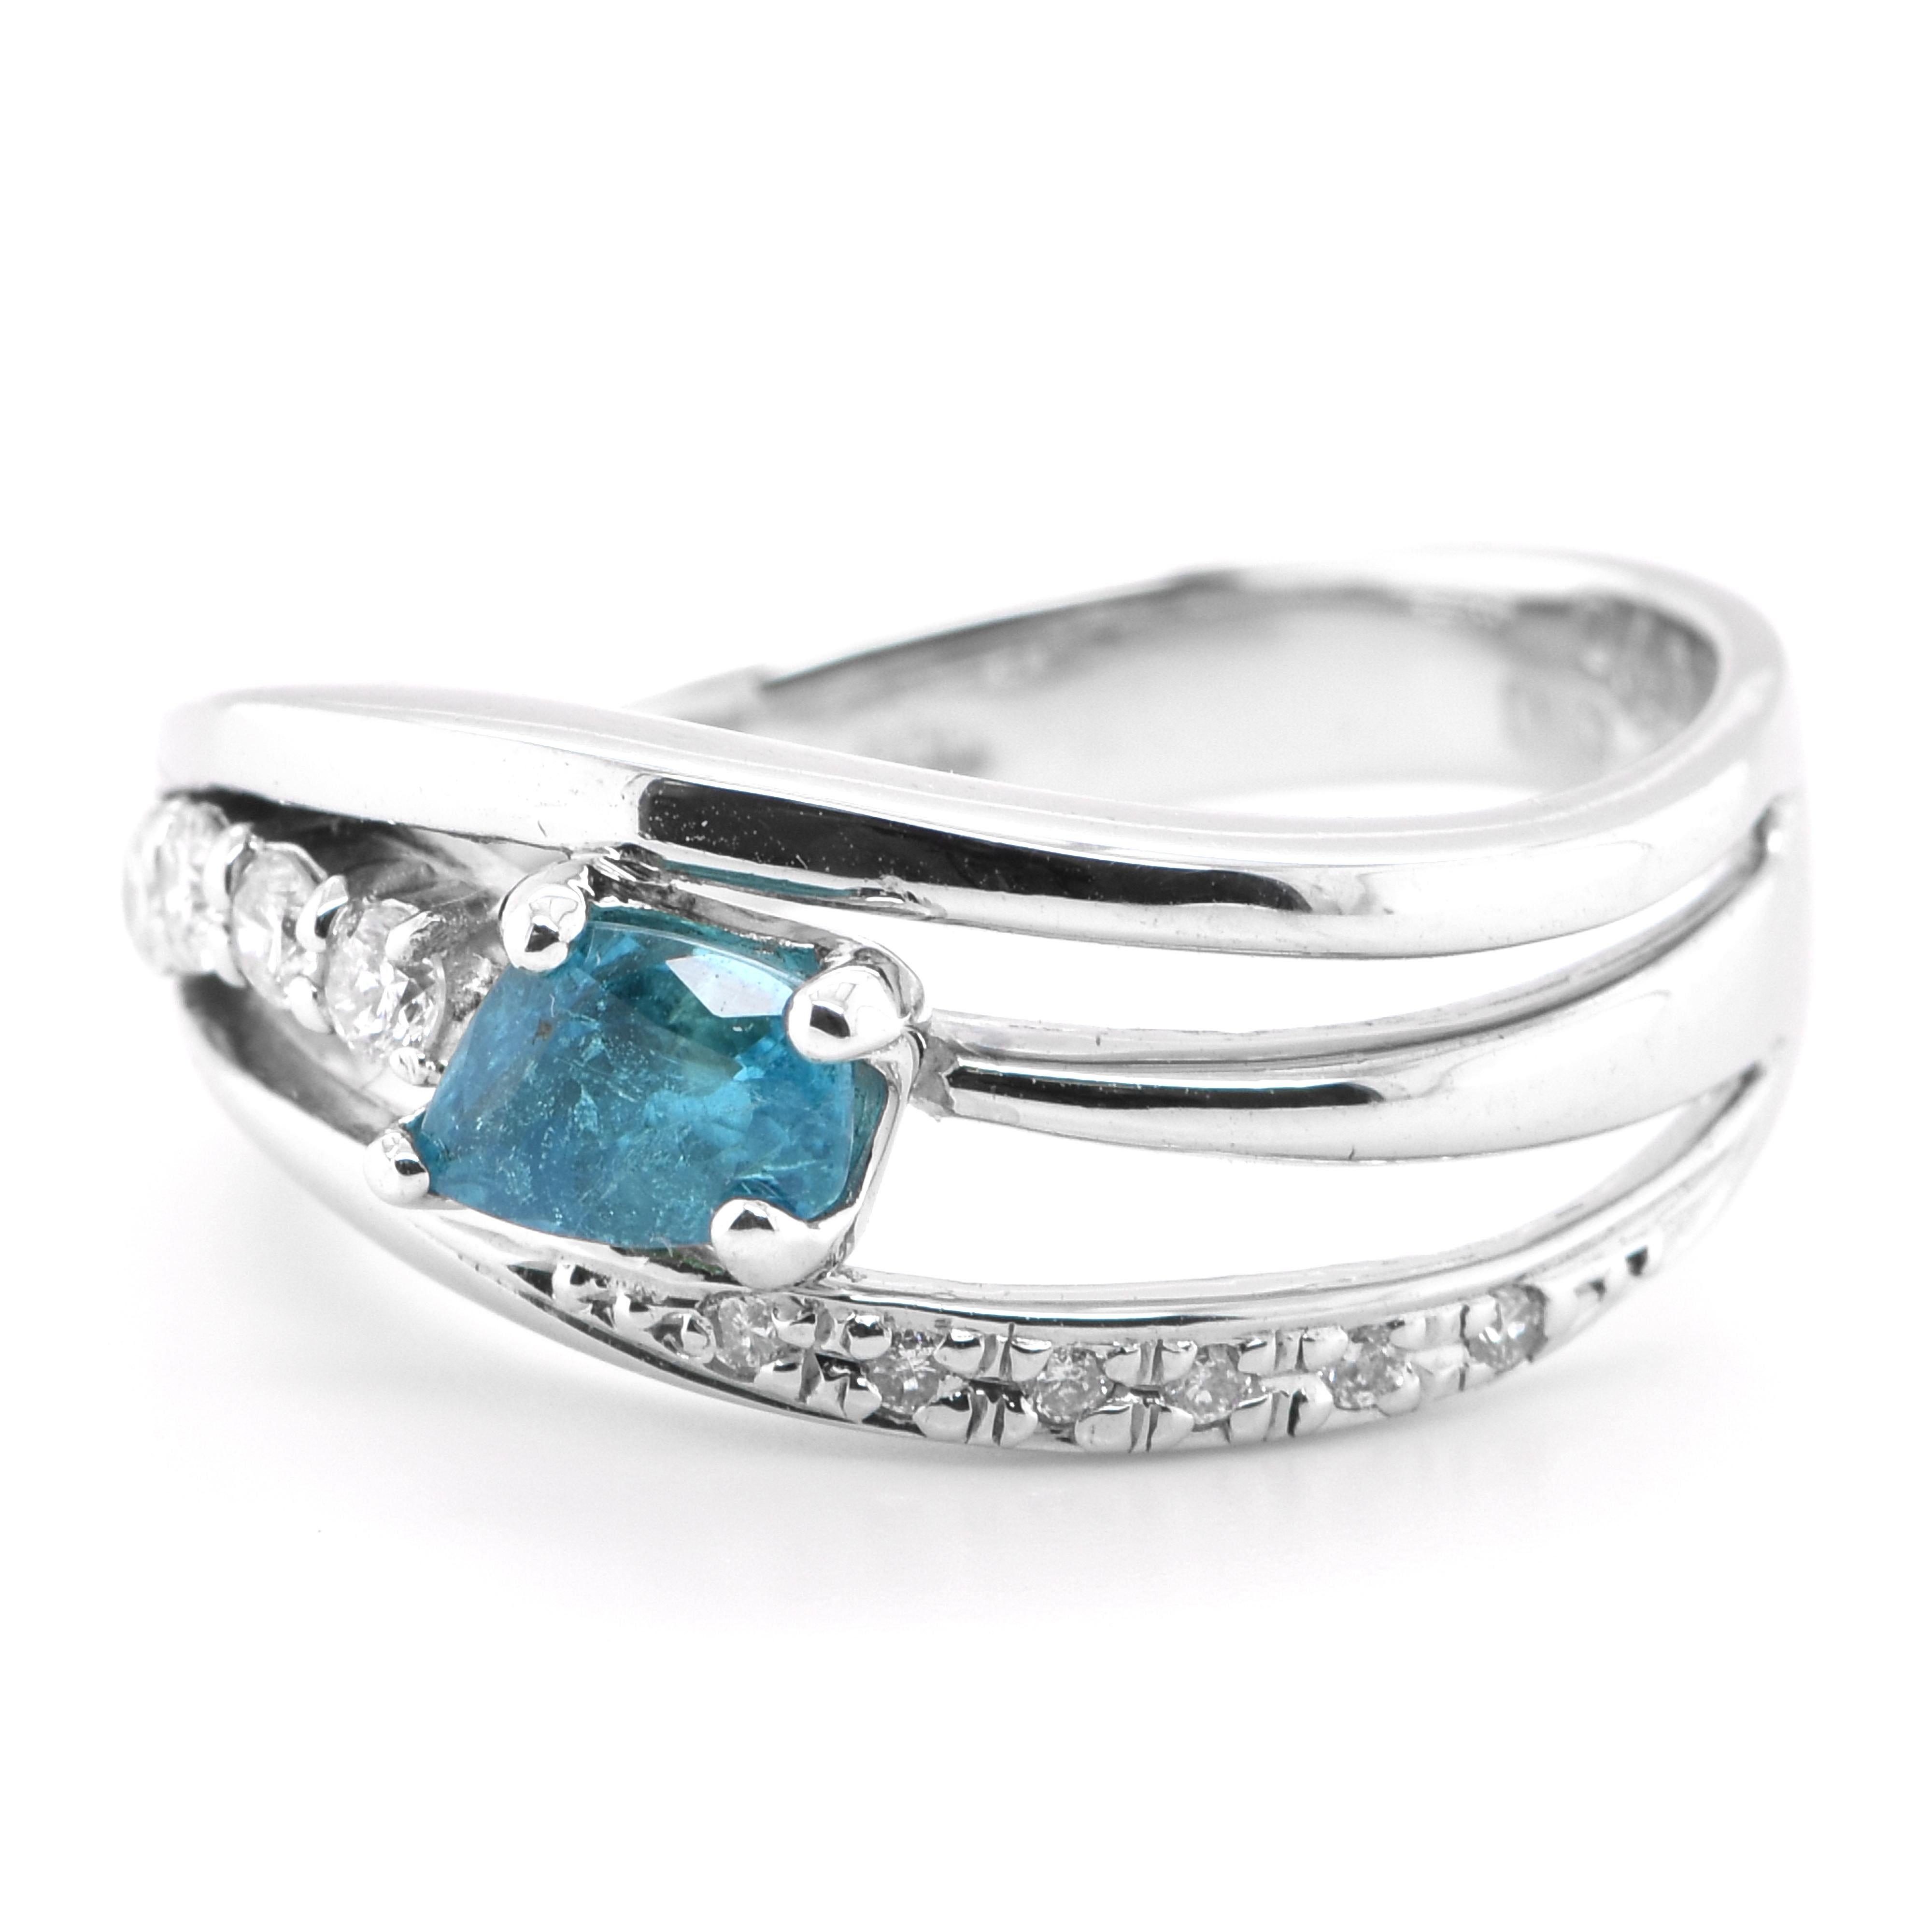 A beautiful Cocktail Ring featuring a GIA Certified 0.48 Carat Natural Brazilian Paraiba Tourmaline and 0.20 Carats of Diamond Accents set in Platinum. Paraiba Tourmalines were only discovered 30 years ago in the Brazilian state of the same name-